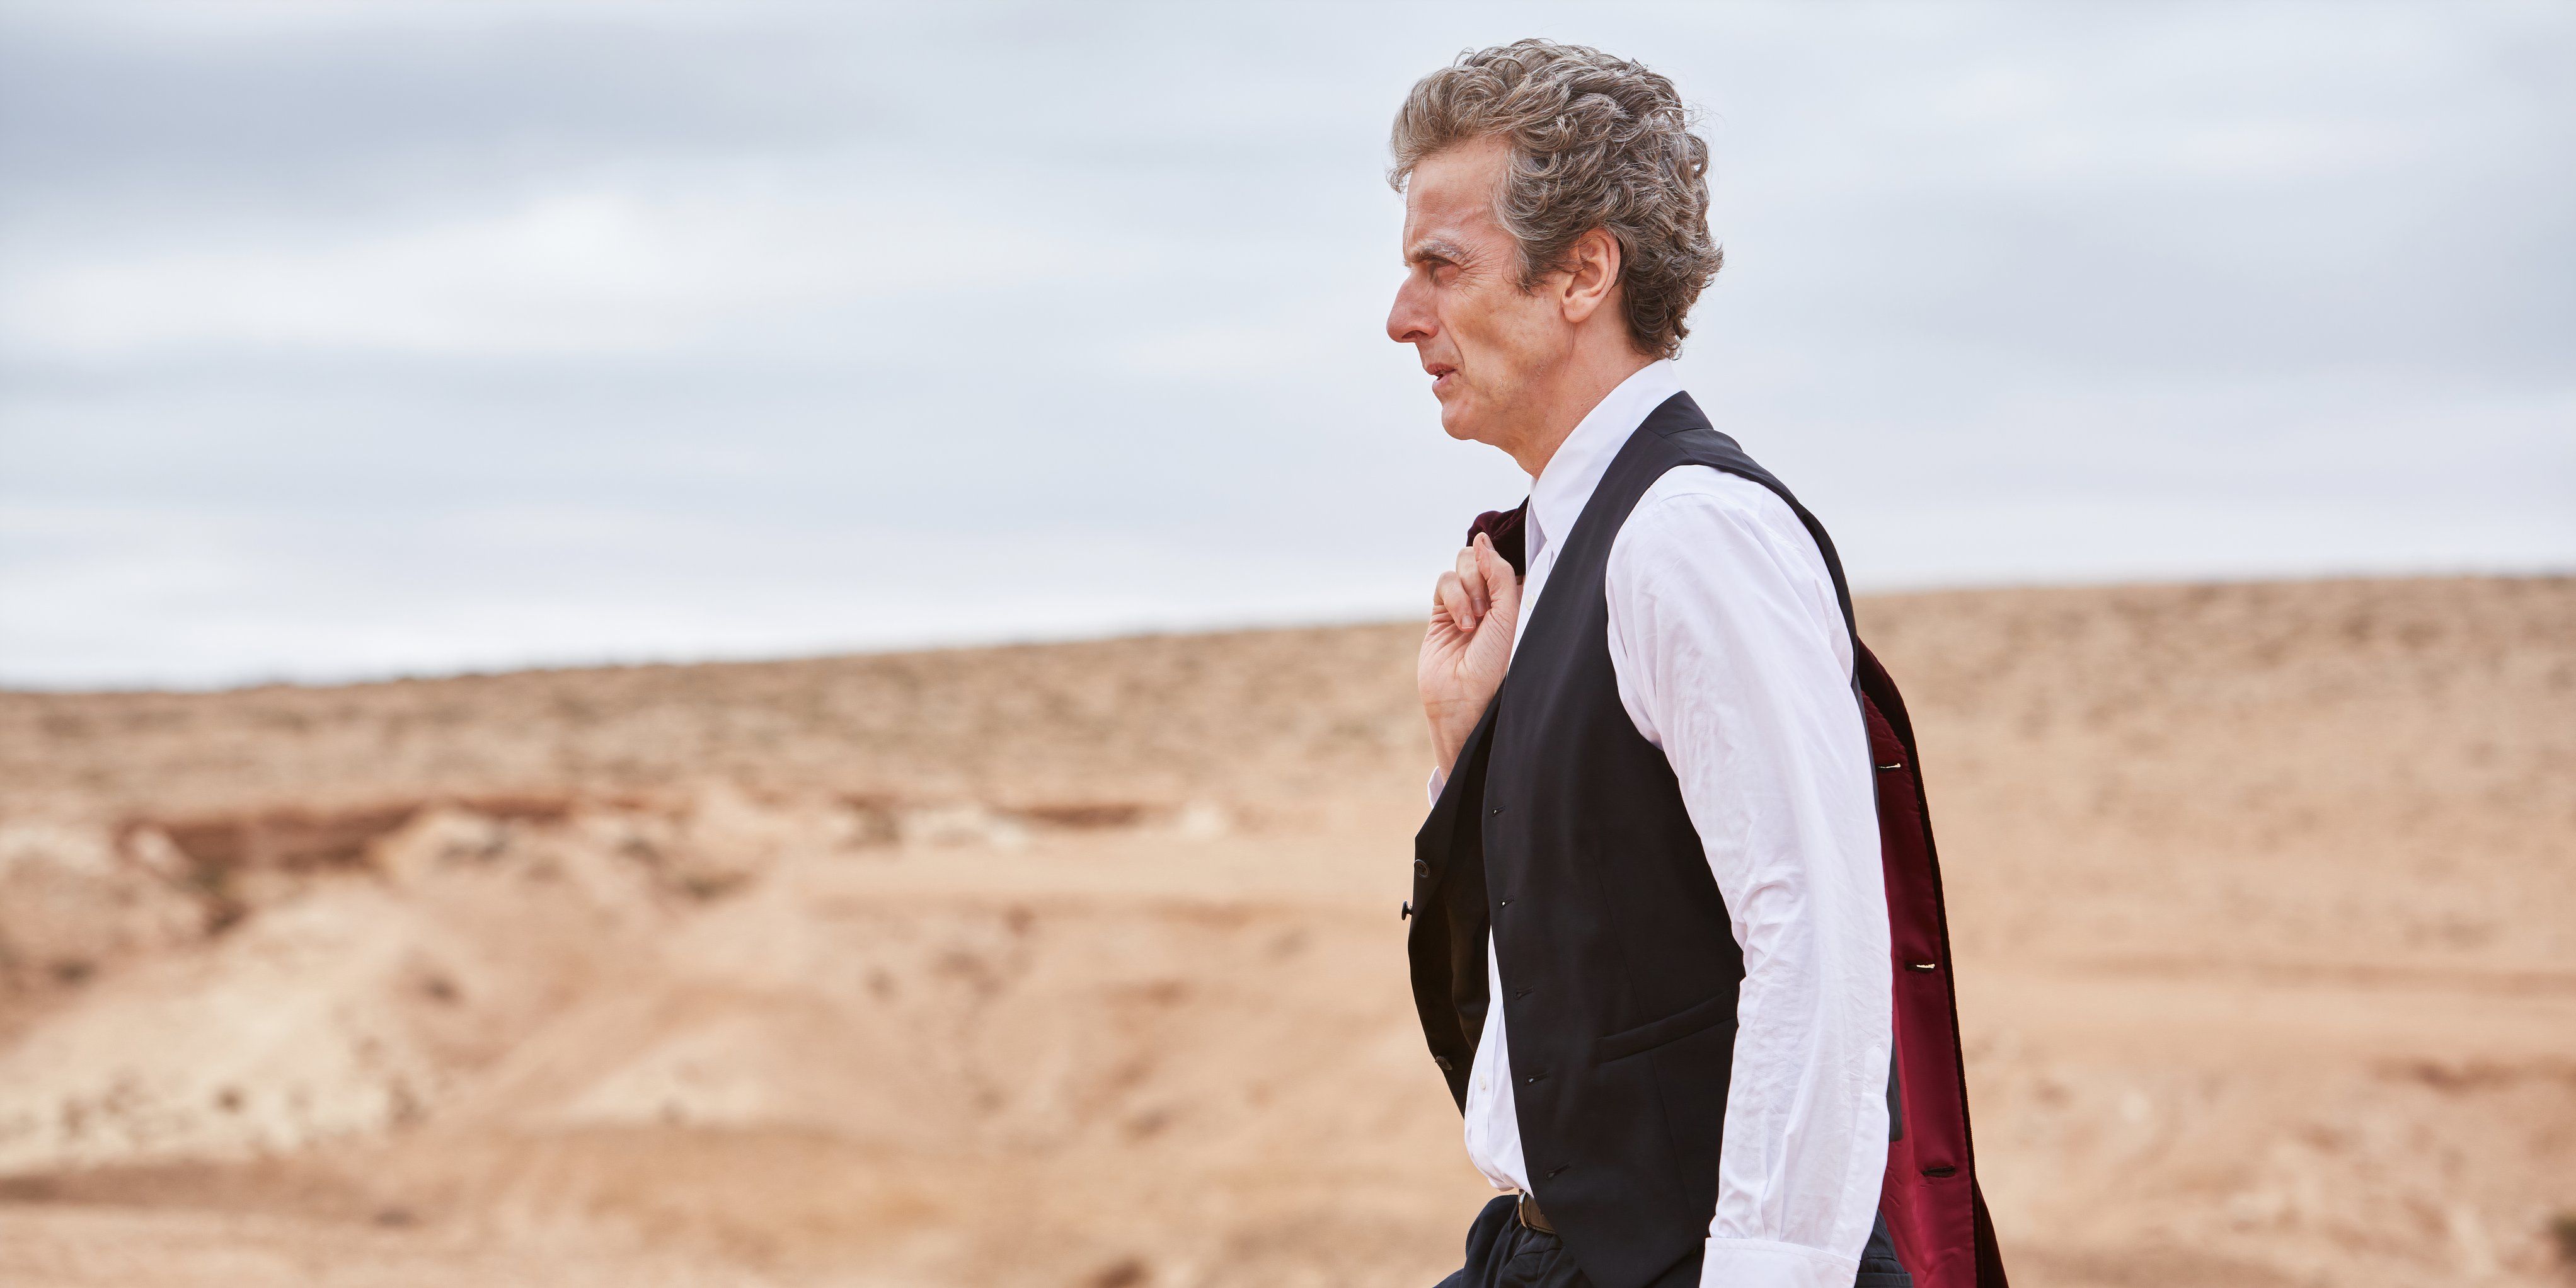 Peter Capaldi as The Twelfth Doctor strolling through Gallifrey with his jacket over his shoulder in Doctor Who, "Hell Bent".